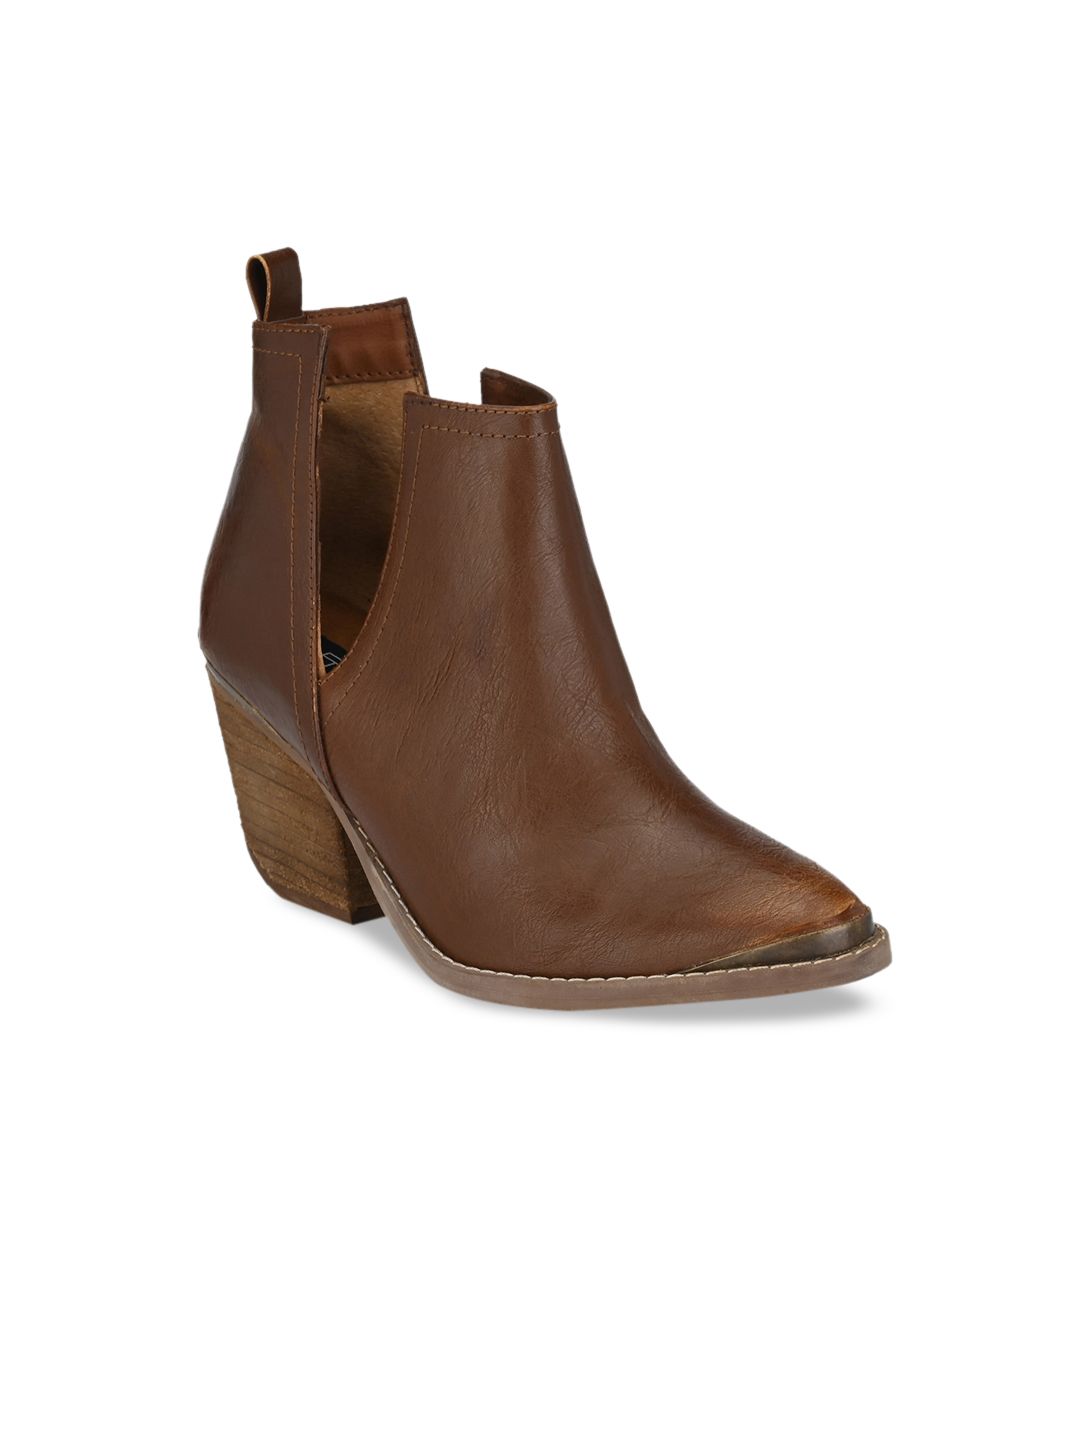 Zebba Brown PU Block Heeled Boots Price in India